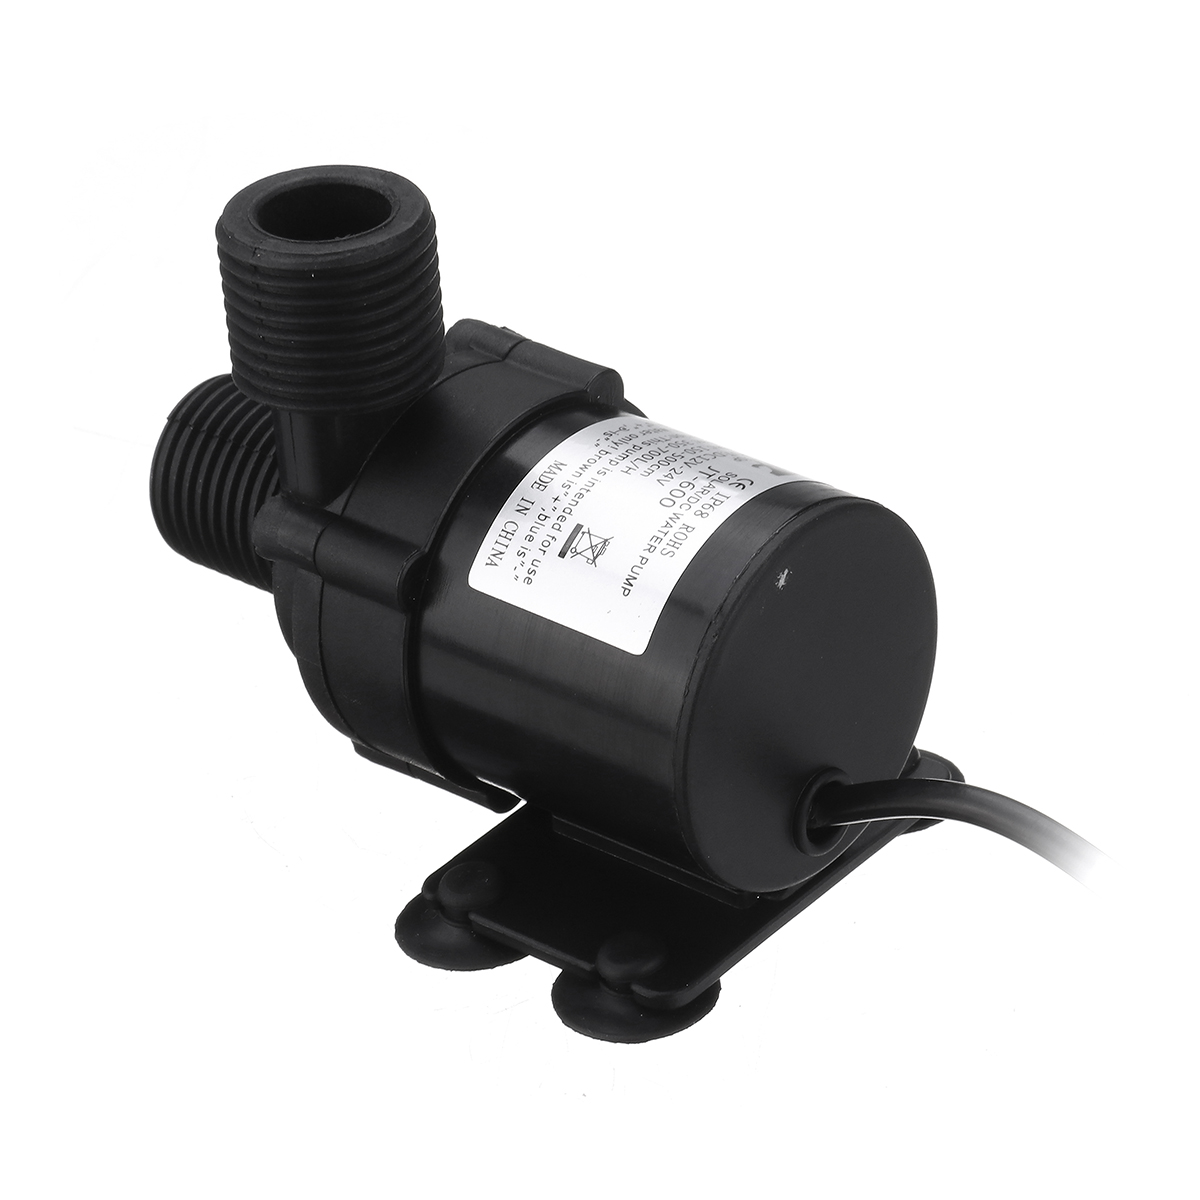 24V12V-Hot-Water-Pump-for-Circulating-Micro-DC-Water-Pump-With-12-Inch-Threaded-Multifunction-Brushl-1435180-5